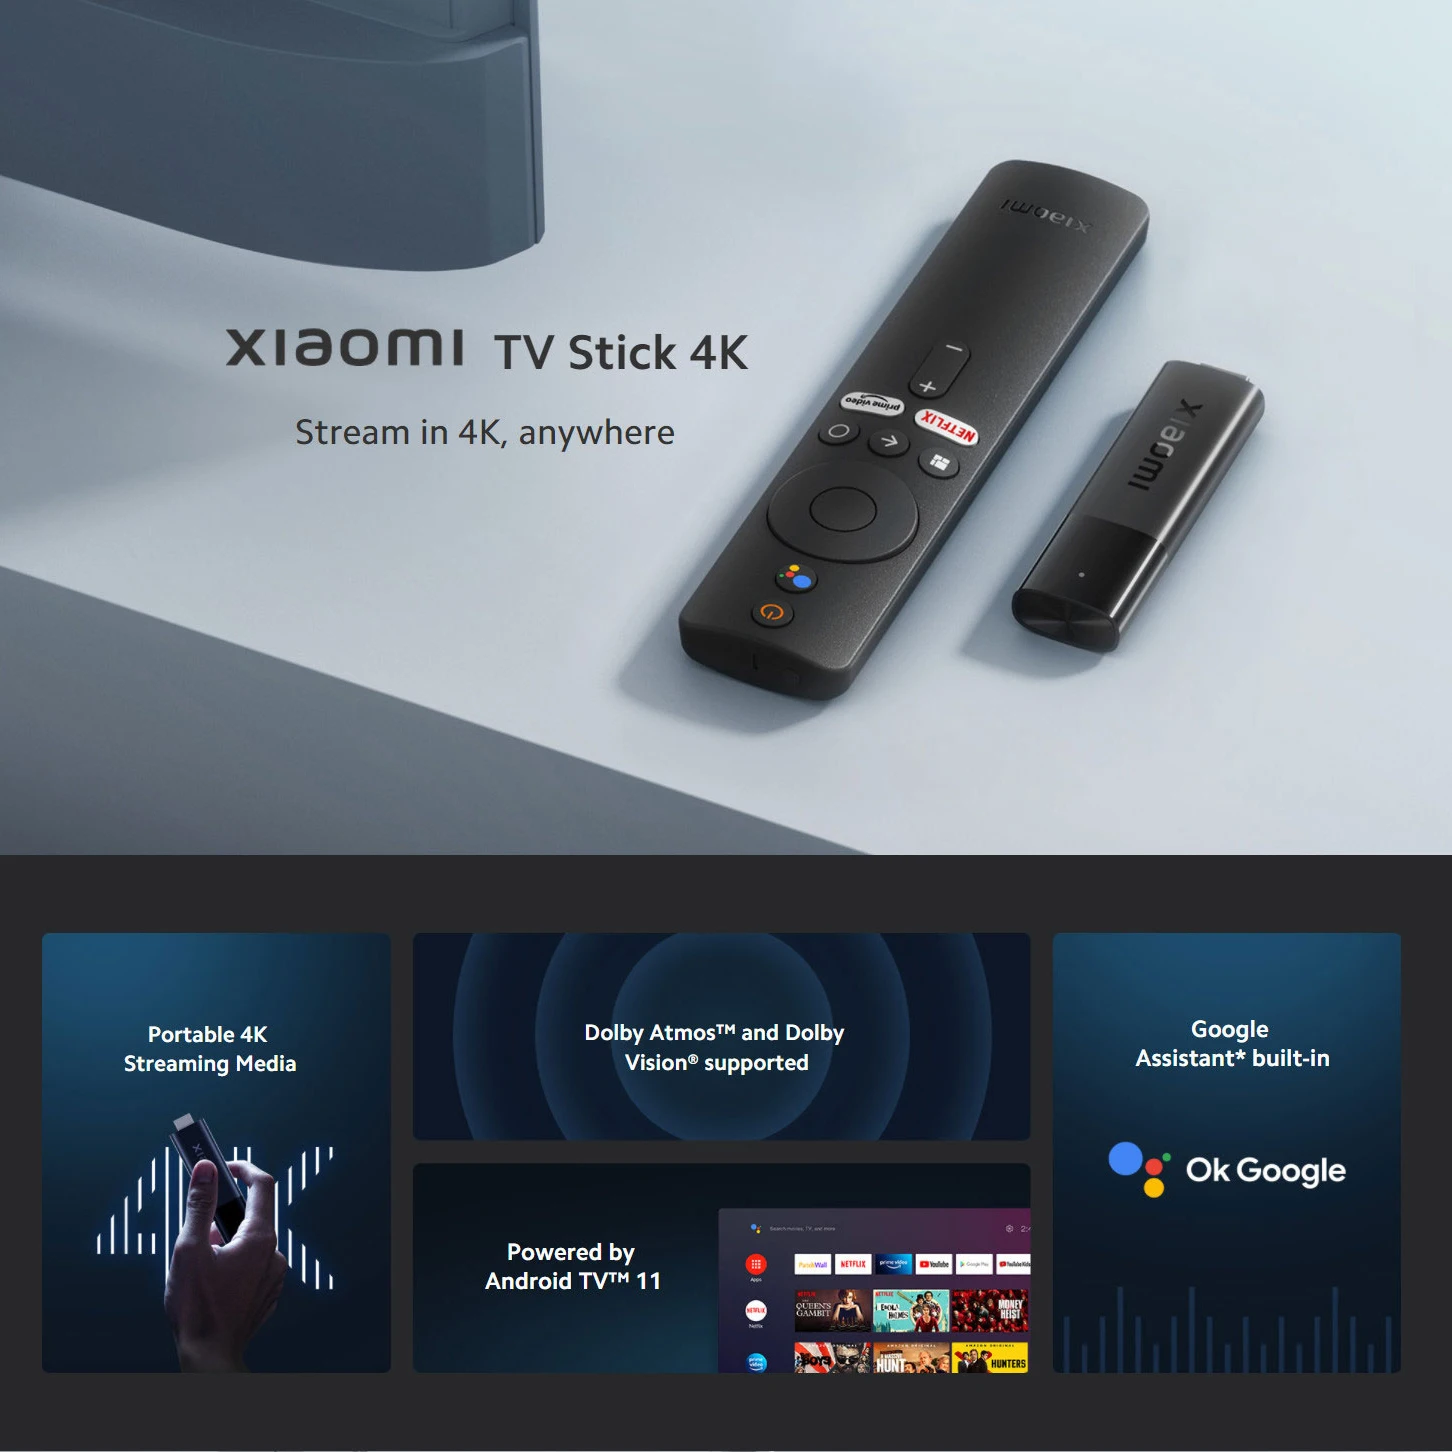 Xiaomi TV Stick 4K Review: Streaming Stick with 4K HDR and AV1 codec